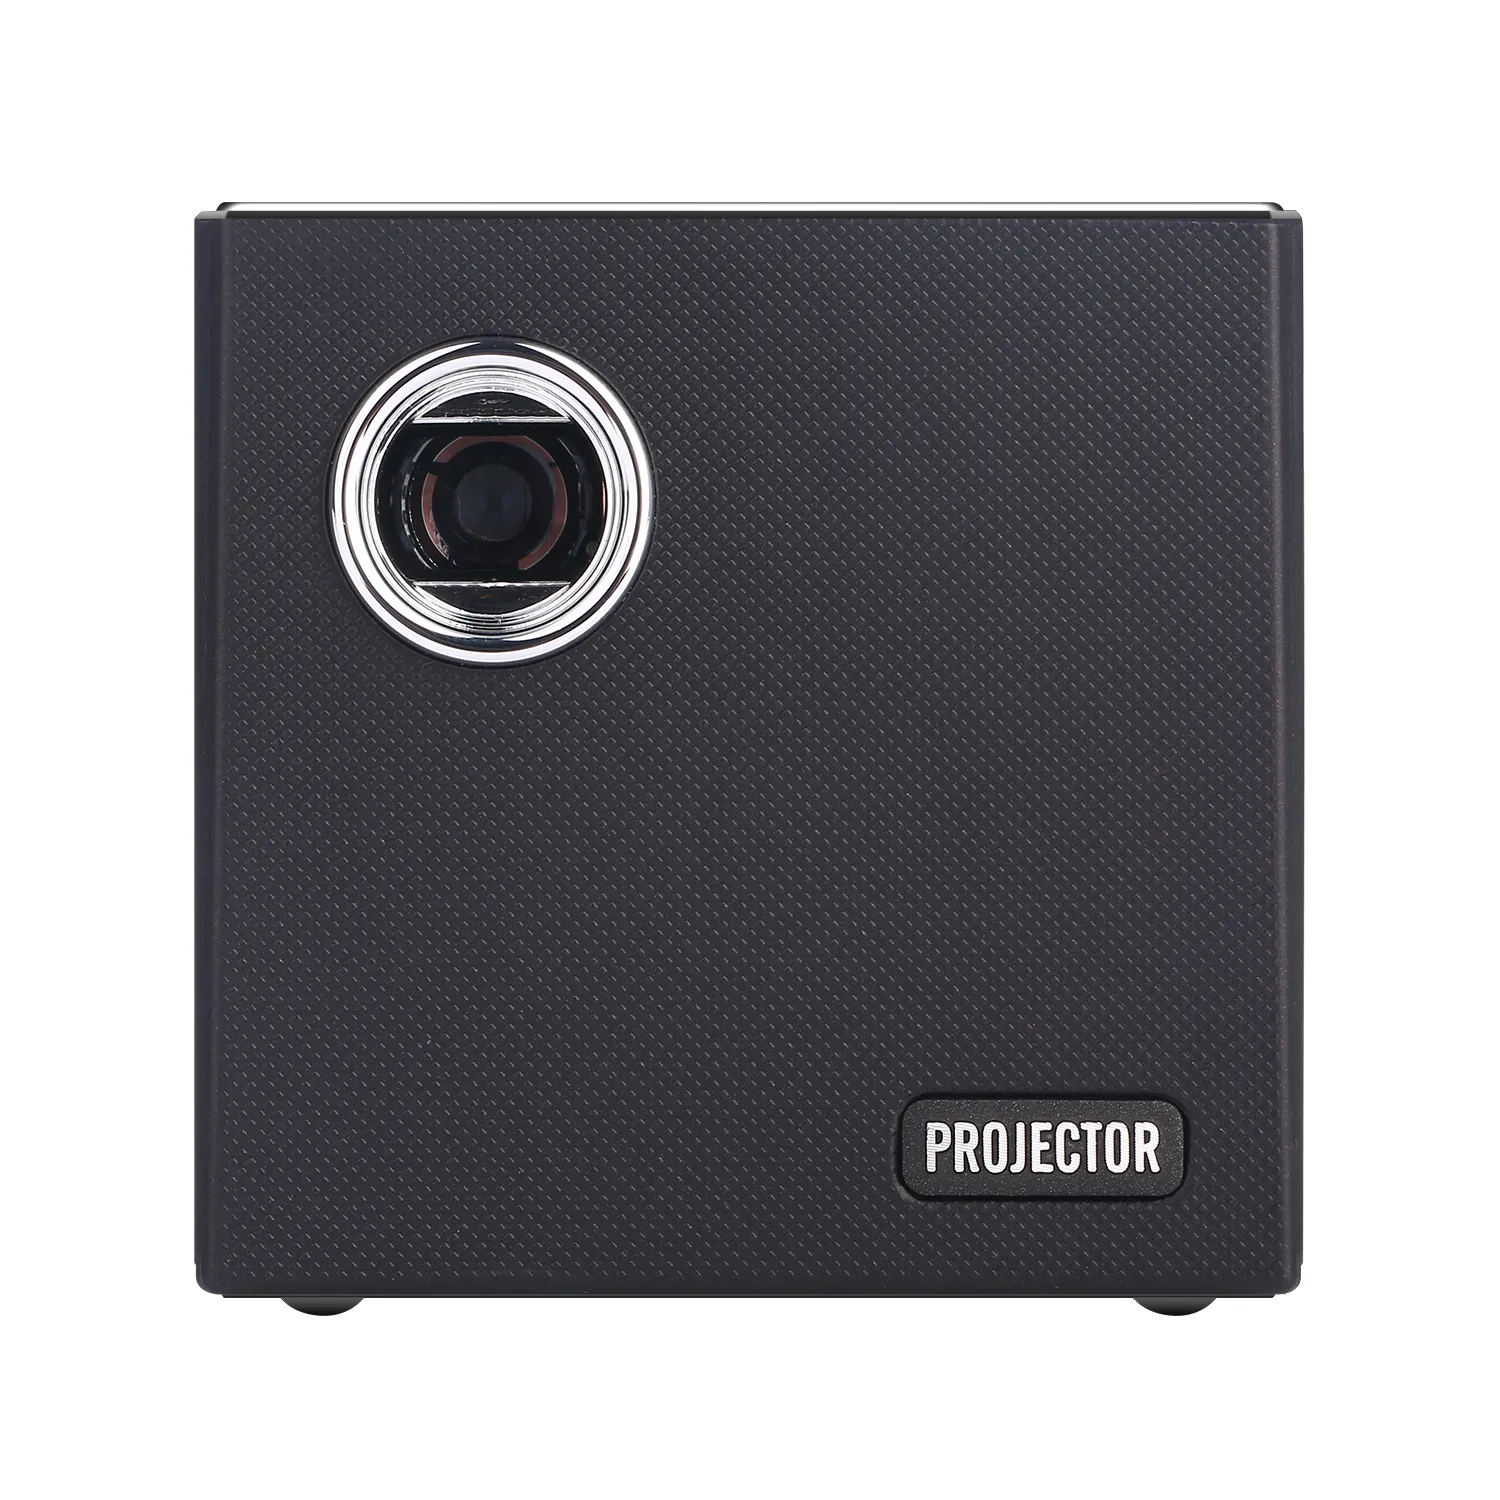 C80 Mini Pocket Projector Android 7.1 1GB 16 GB 2,4g/5G WiFi BT4.0 120 inch portable LED projectors